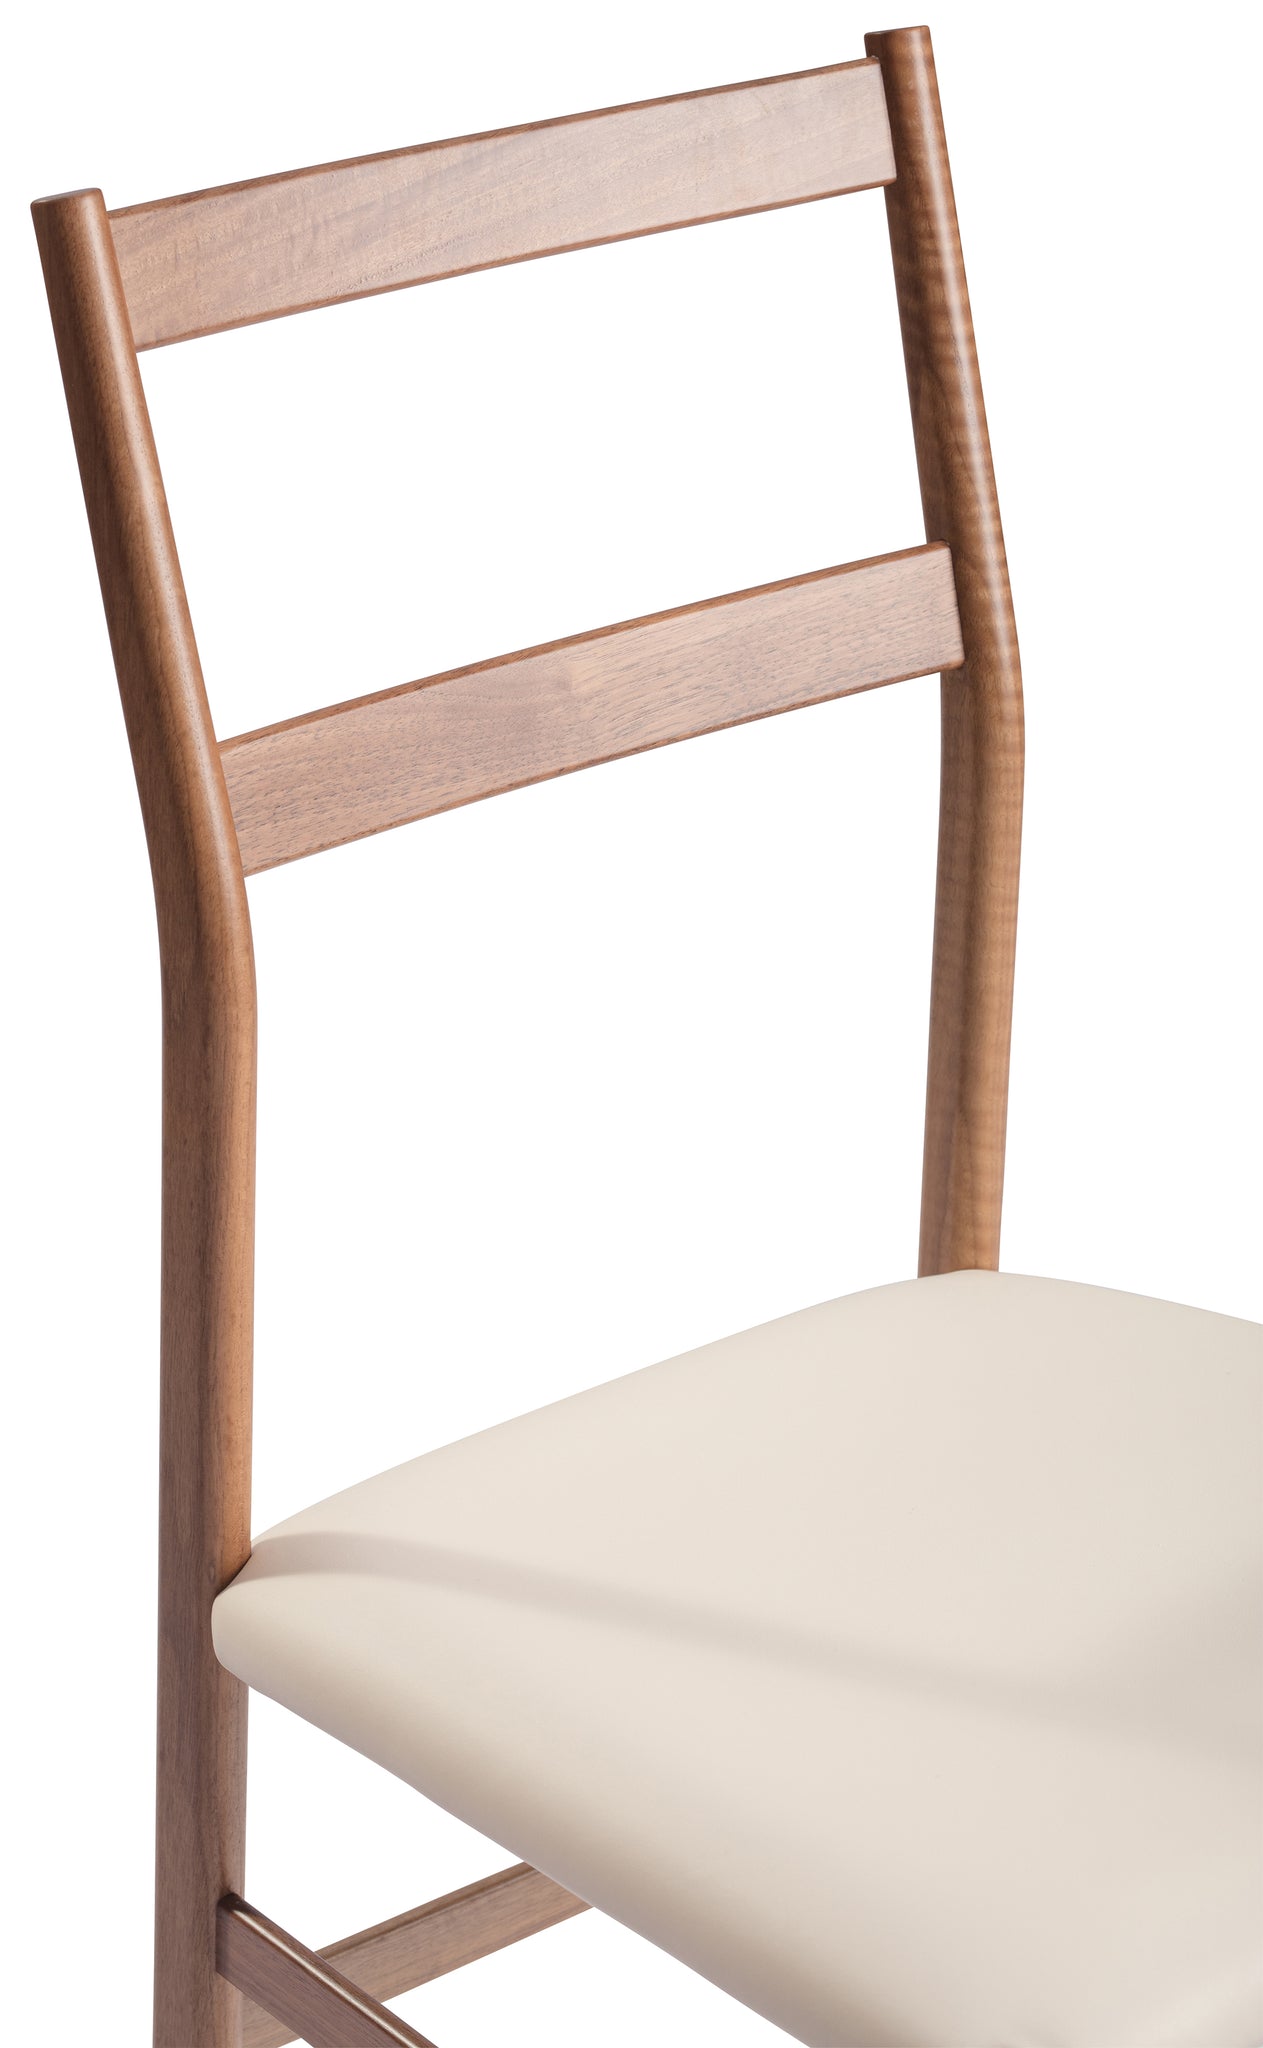 Close-up 2 of a Snella Modern Side Chair, american walnut frame, soft white leather seat, closely resembling the superleggera chair by Gio Ponti, ultra-lightweight at 5 lbs, contract grade. Manufactured by Klarel in Italy. #K42-5